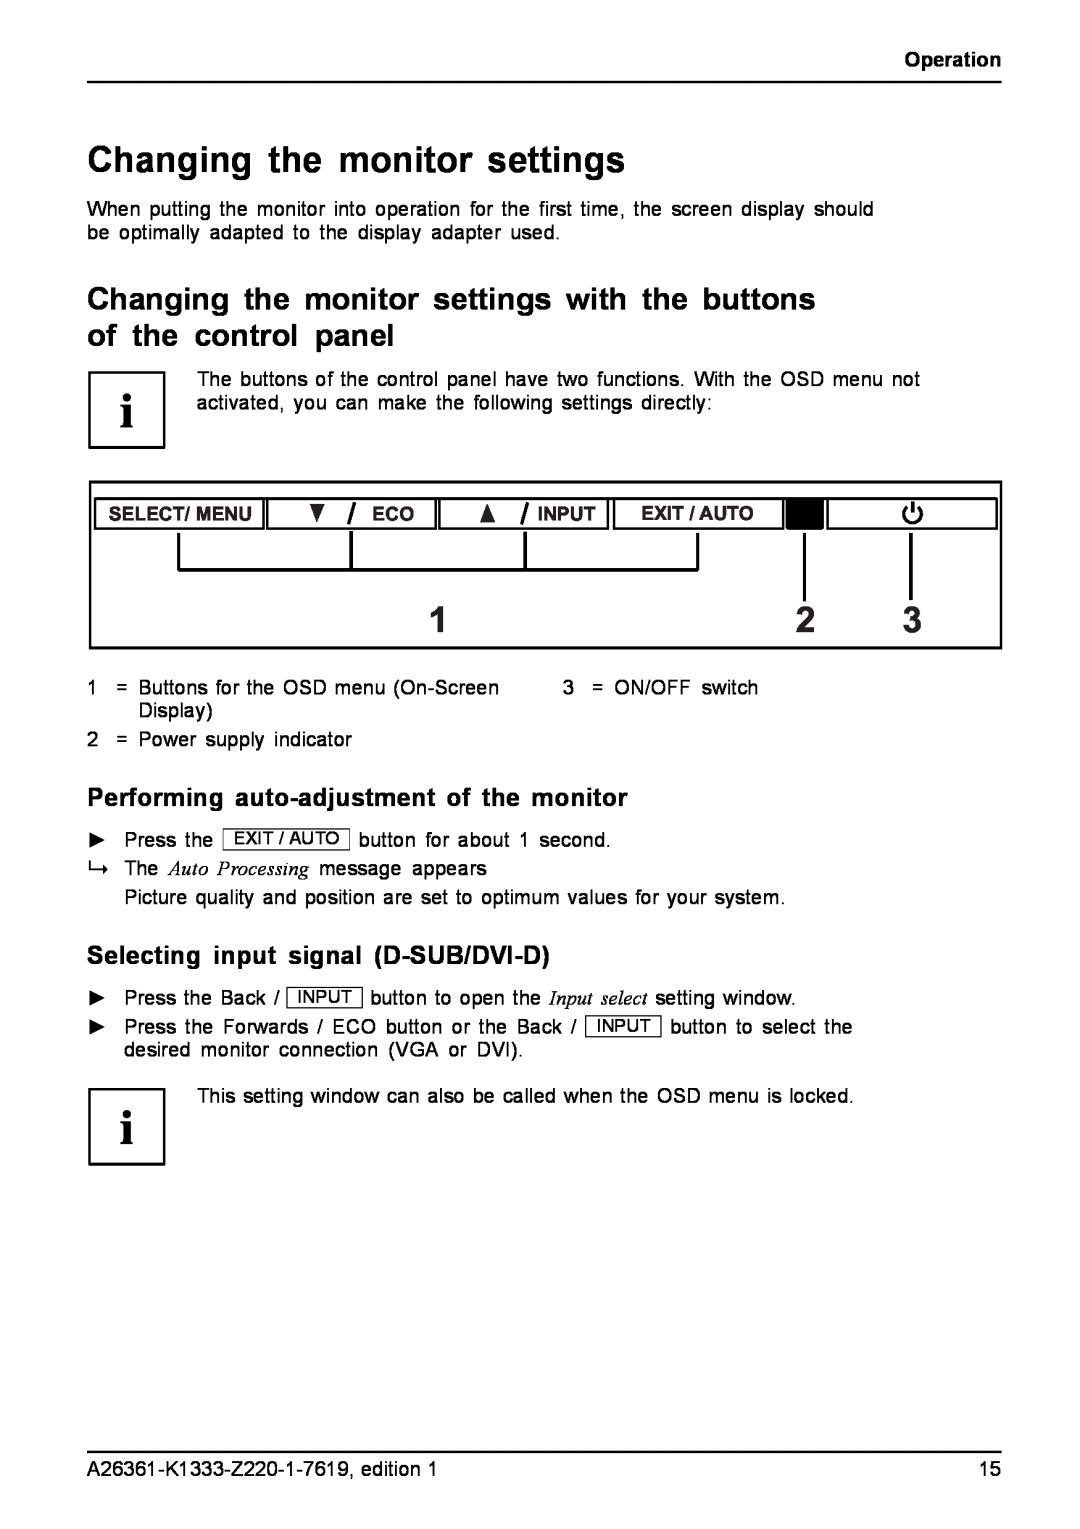 Fujitsu B19W-5 ECO manual Changing the monitor settings with the buttons of the control panel, Operation 